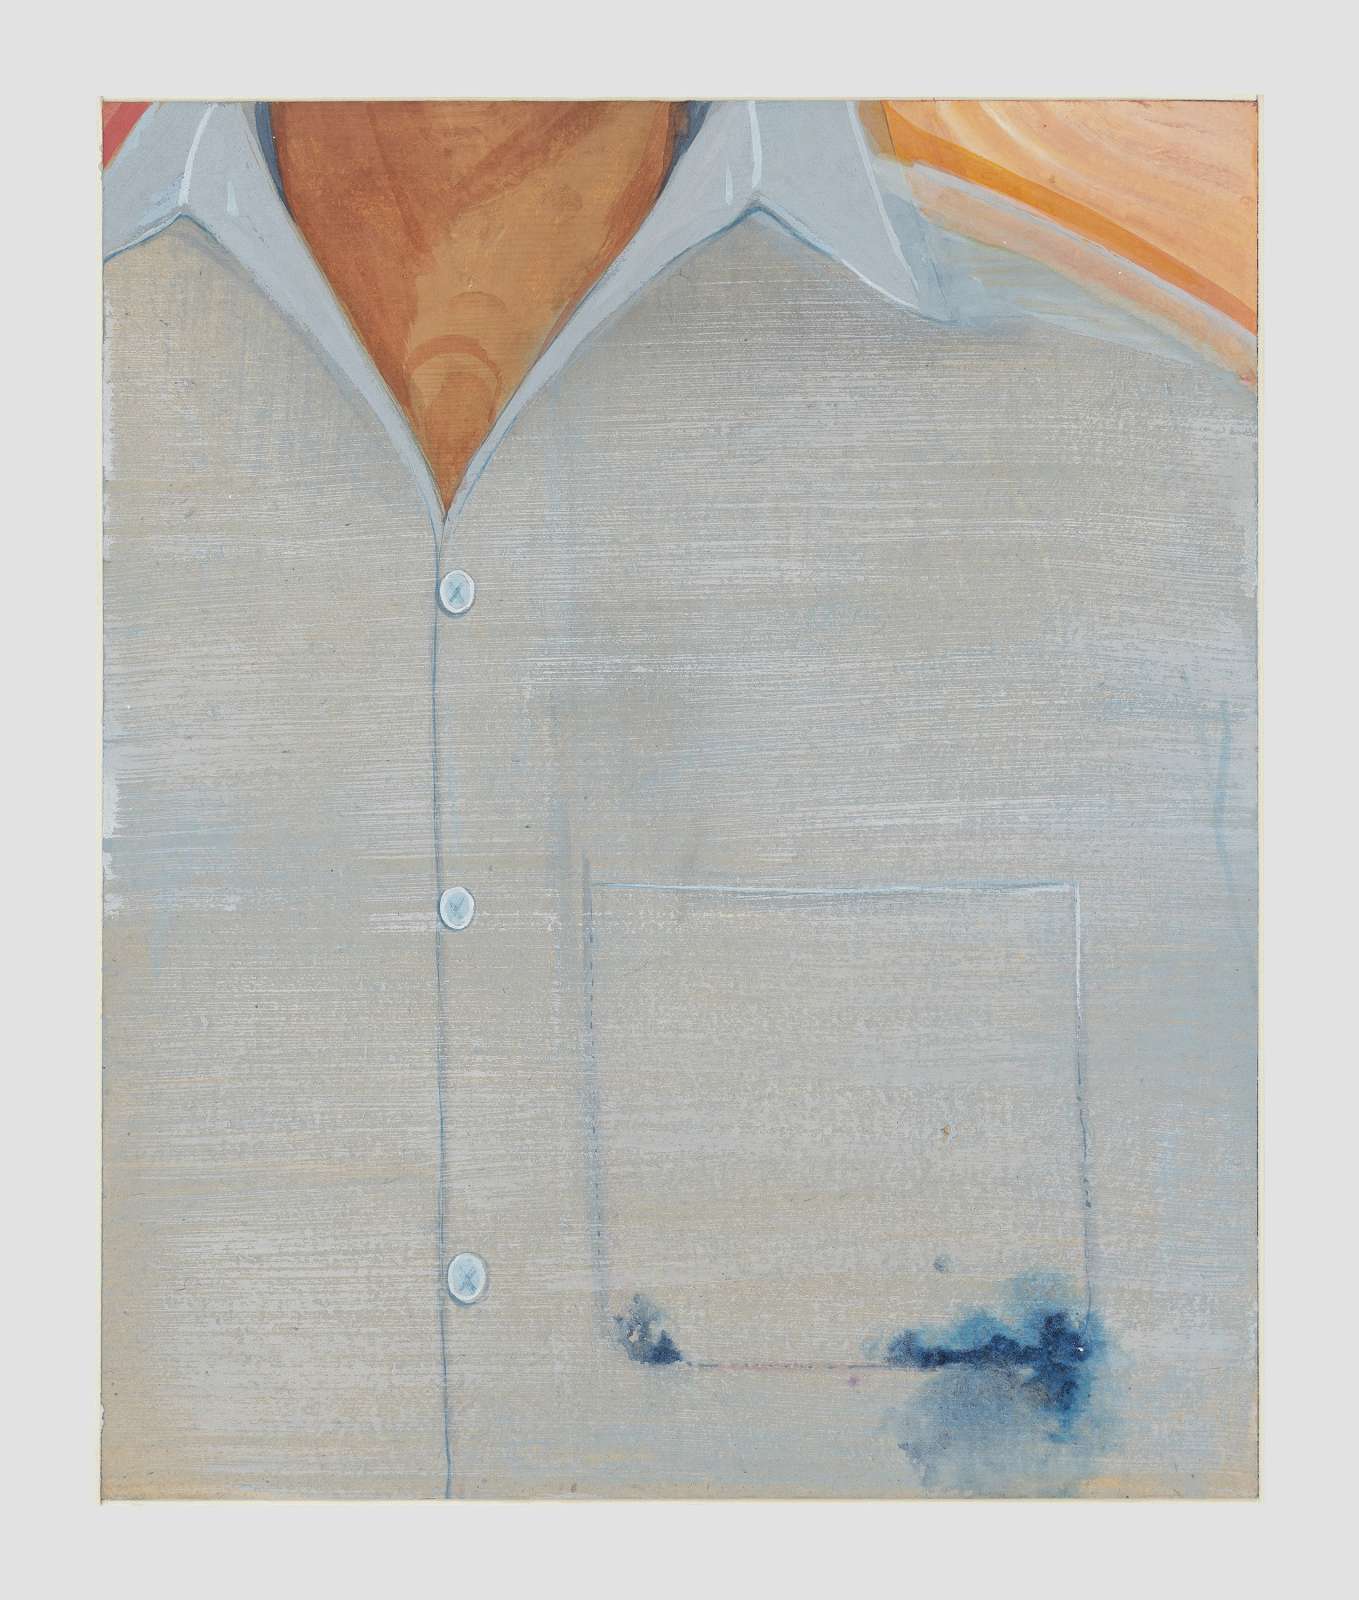 Mahesh Baliga, Poet with ink on his pocket, 2022. Casein on board © Mahesh Baliga Courtesy the artist, Project 88, and David Zwirner